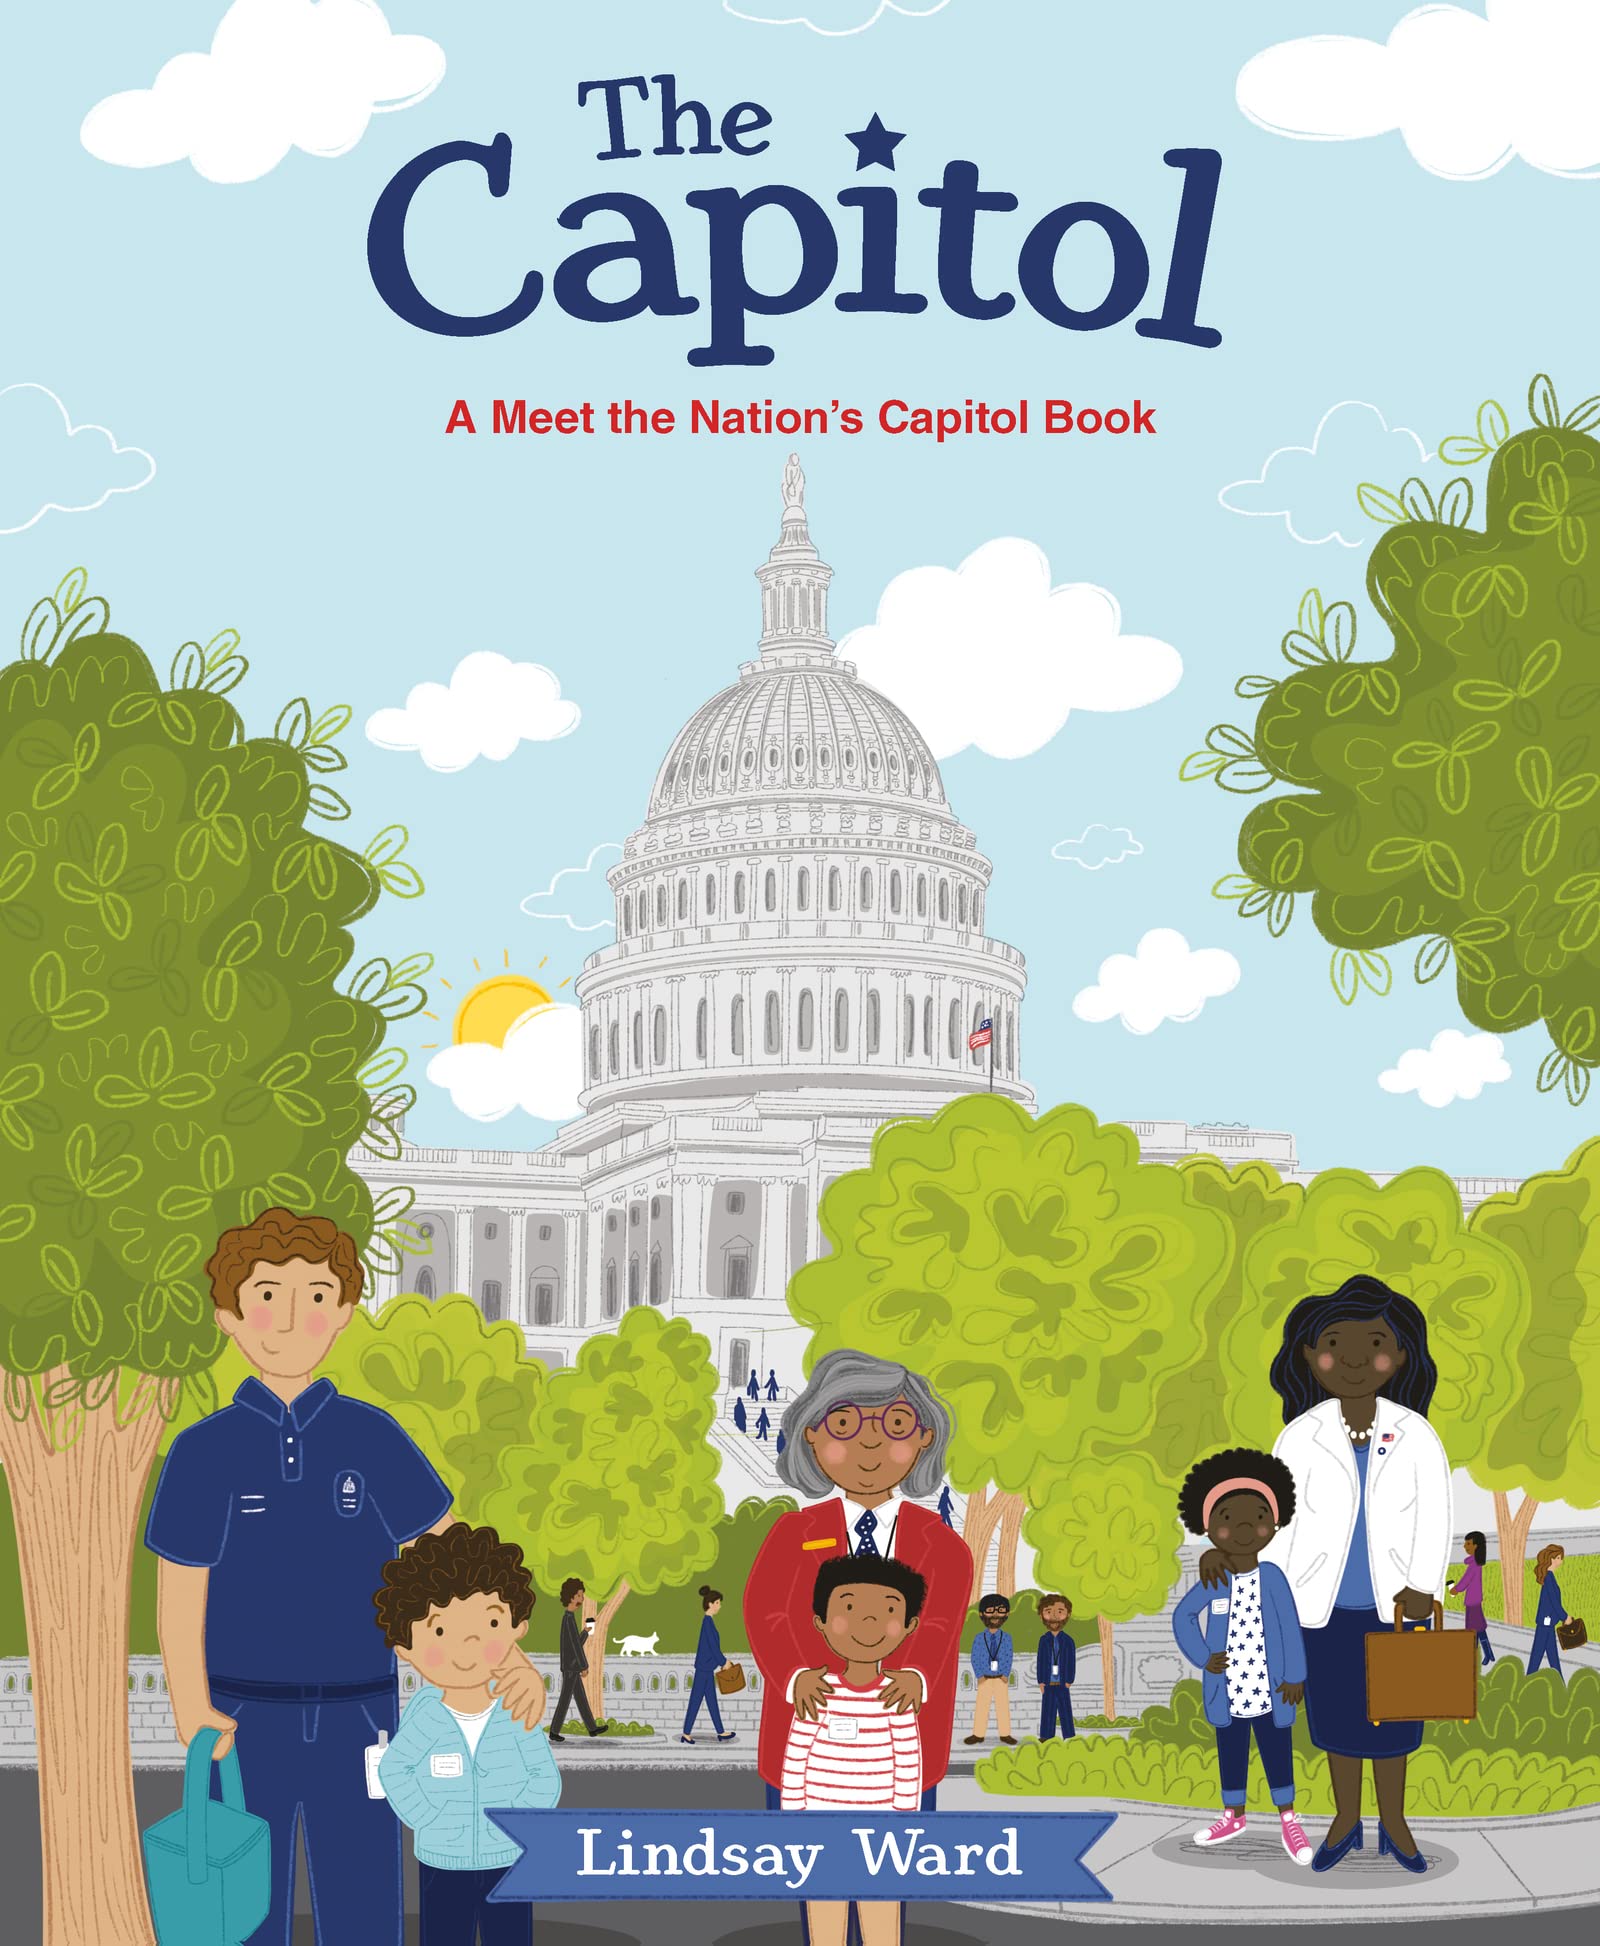 The Capitol: A Meet the Nation’s Capitol Book